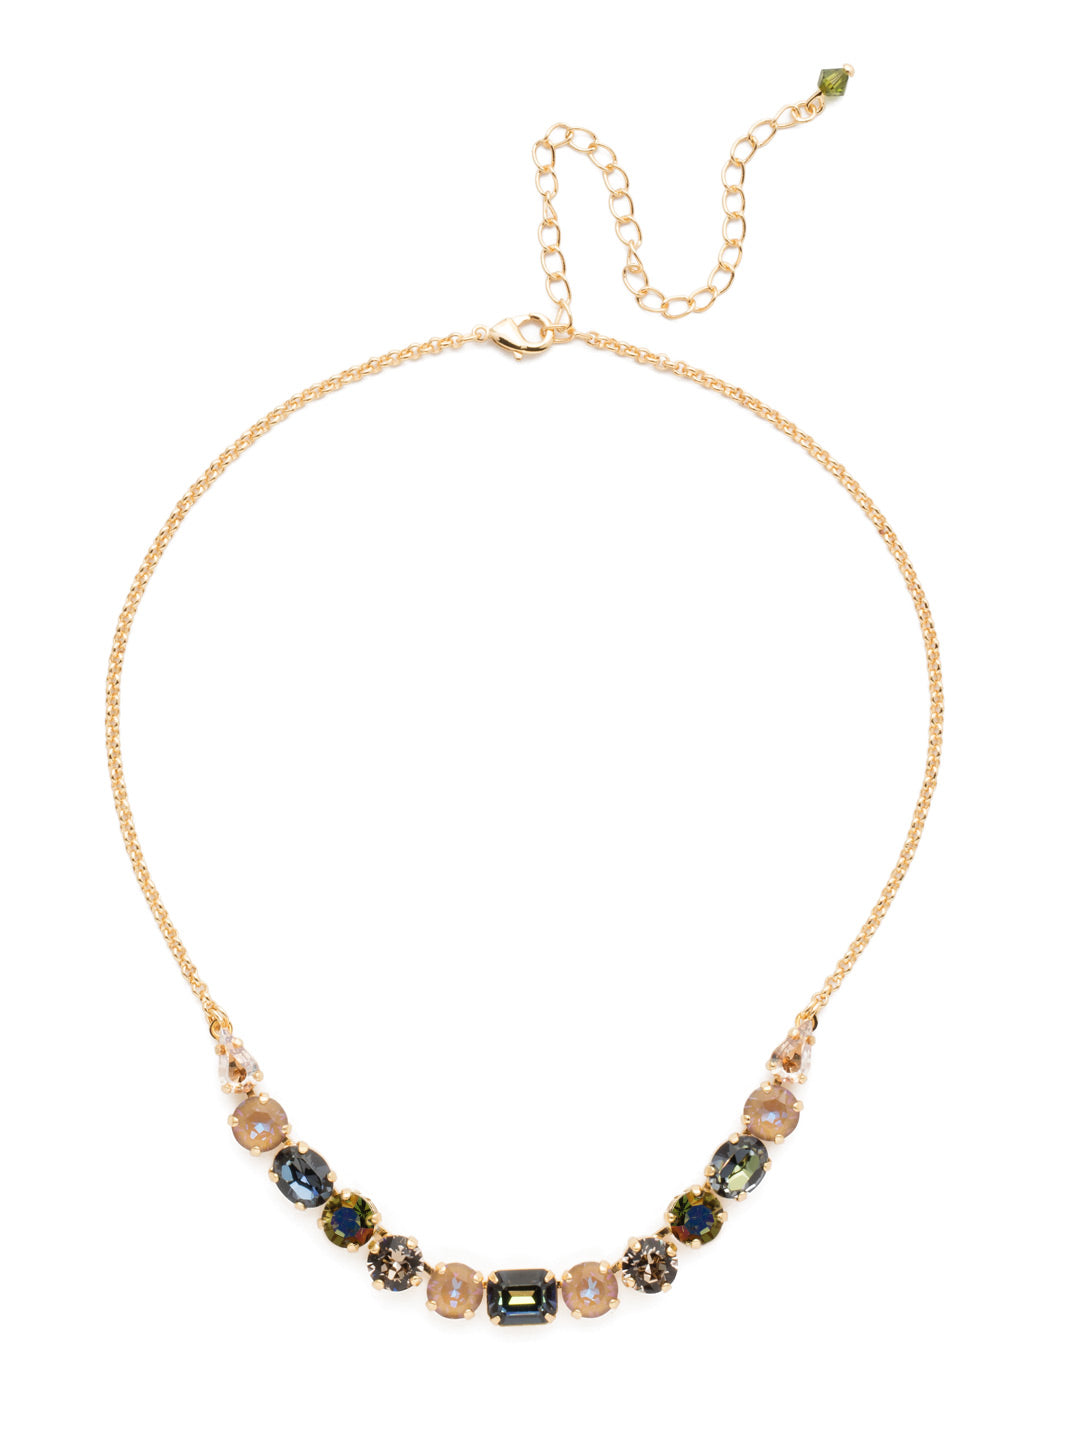 Tansy Half Line Tennis Necklace - NDQ14BGCSM - <p>Oval, round, emerald, pear and cushion cut crystals are accented by a delicate chain for subtle sparkle that looks great layered or worn solo. From Sorrelli's Cashmere collection in our Bright Gold-tone finish.</p>